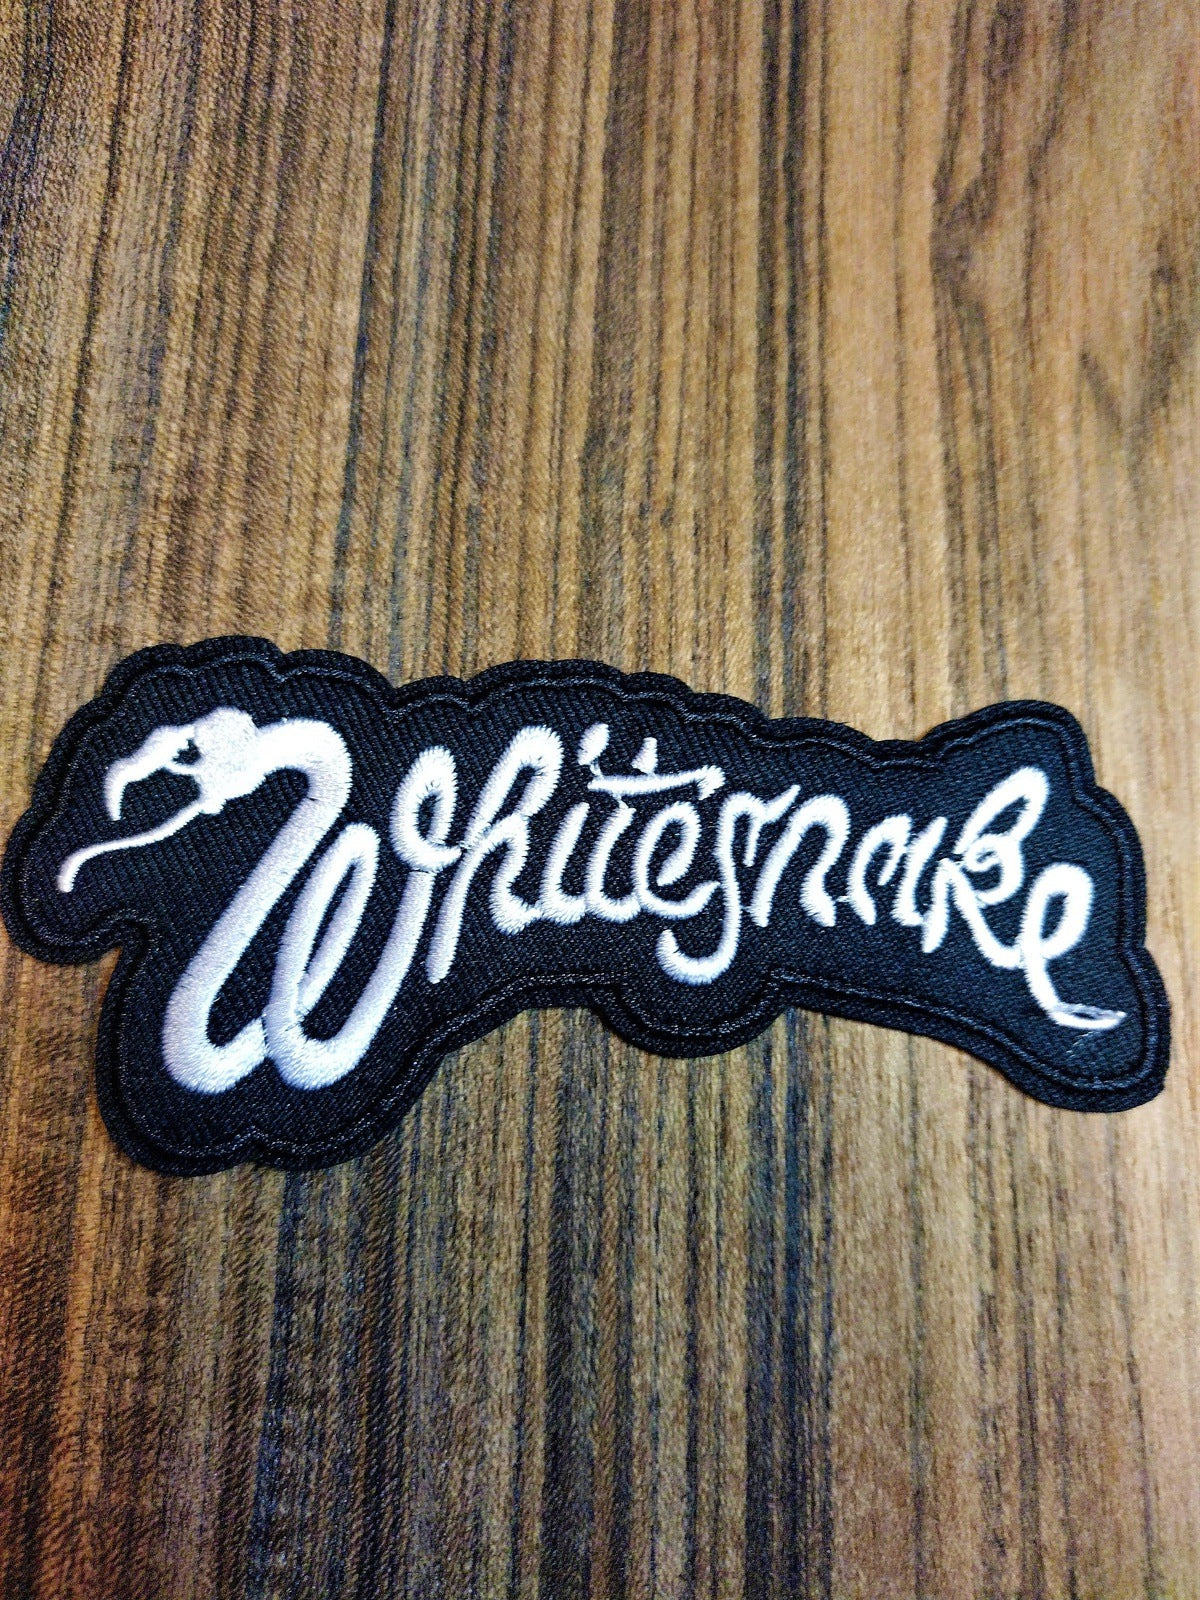 Whitesnake Patch approx. 4.5 inches